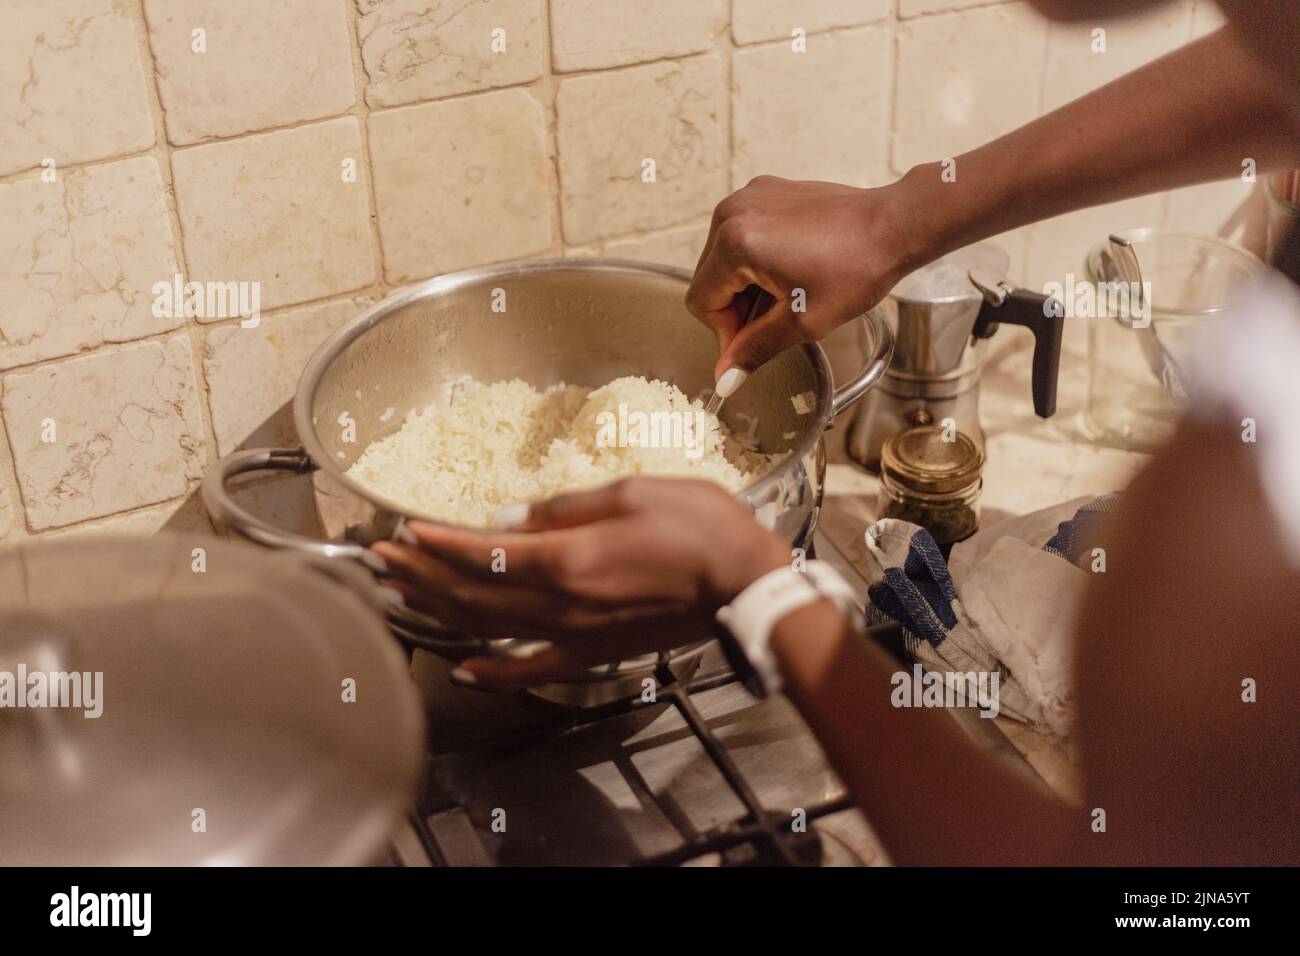 preparing rice for side dish at home woman hand detail Stock Photo